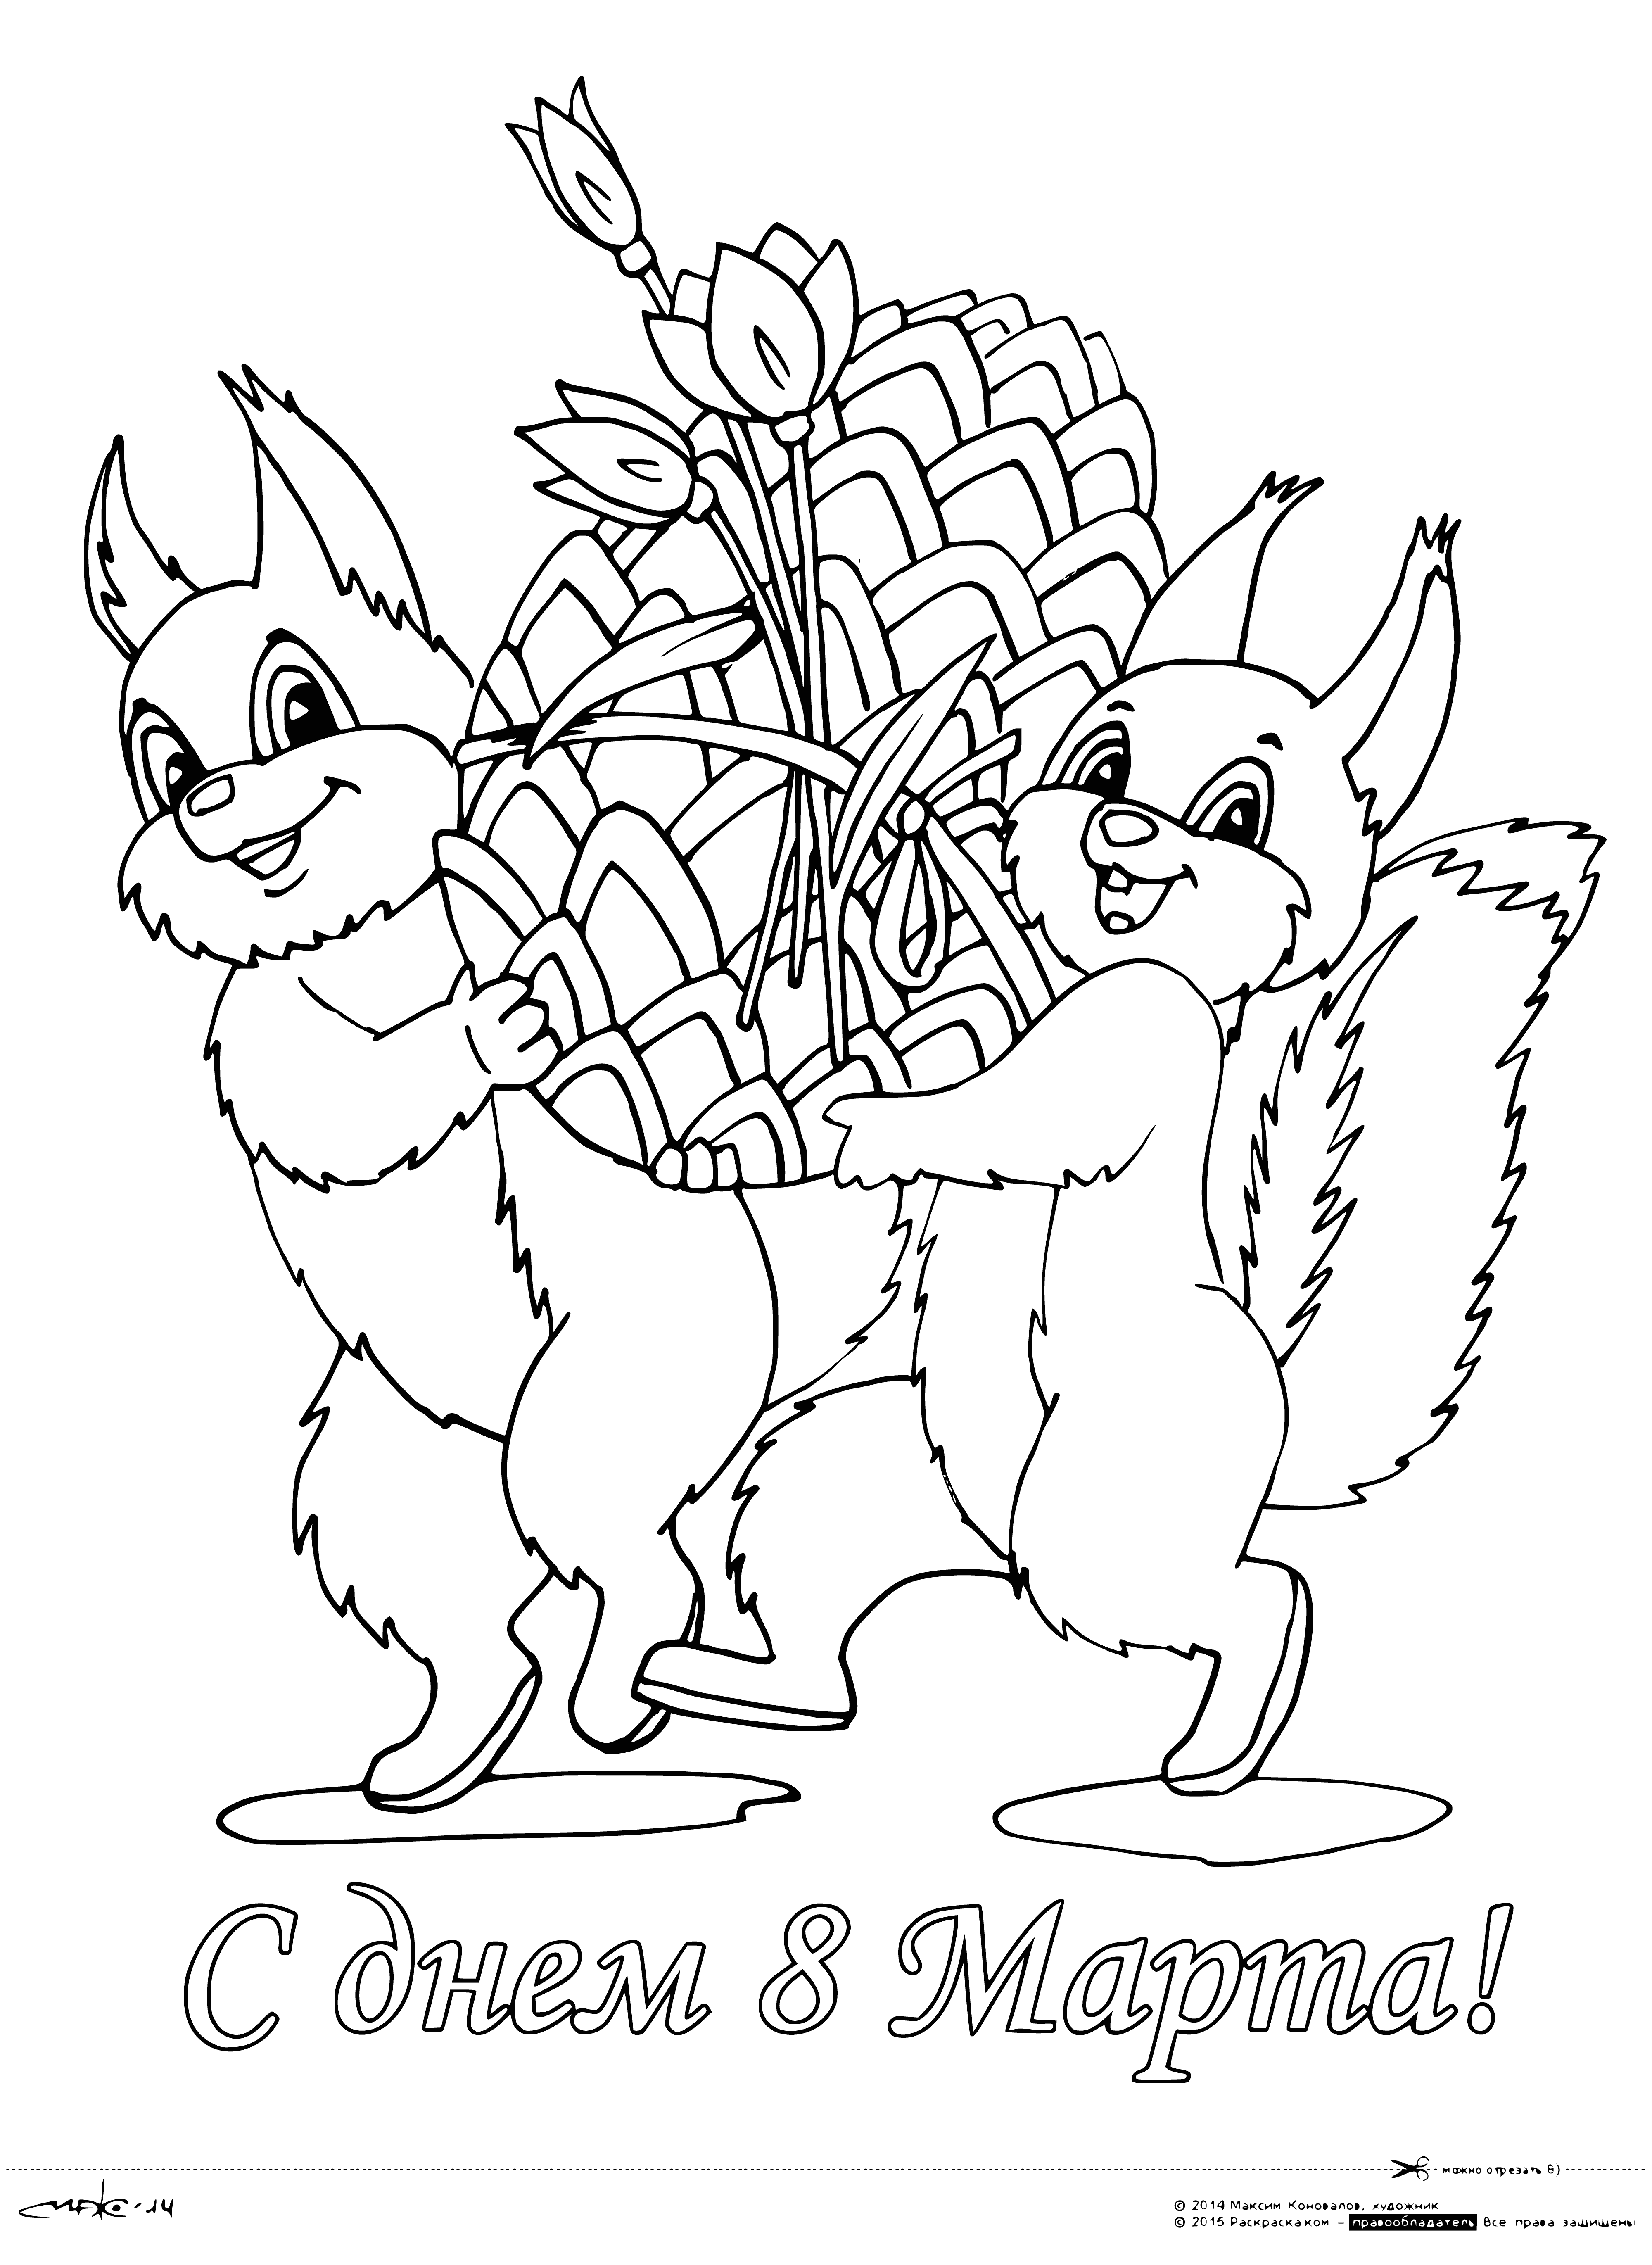 coloring page: A cartoon woman celebrates International Women's Day, holding a gold 8 in one hand and a ribbon in the other. "Happy 8 March!" text reads.